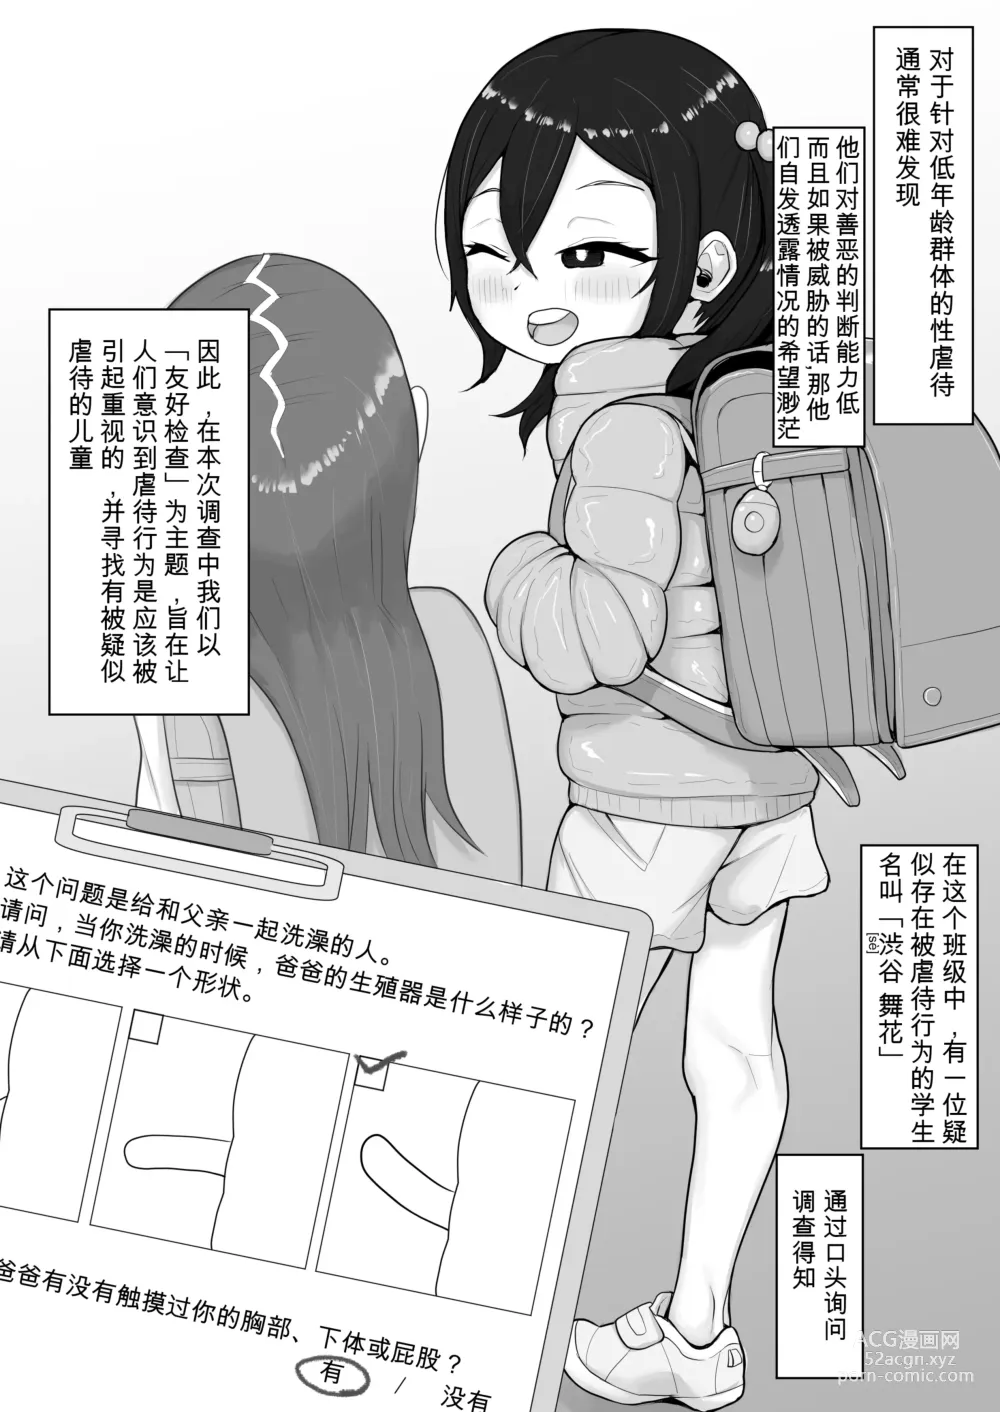 Page 1 of doujinshi js Relatives H Questionnaire 2p Manga + EX Scene 2p